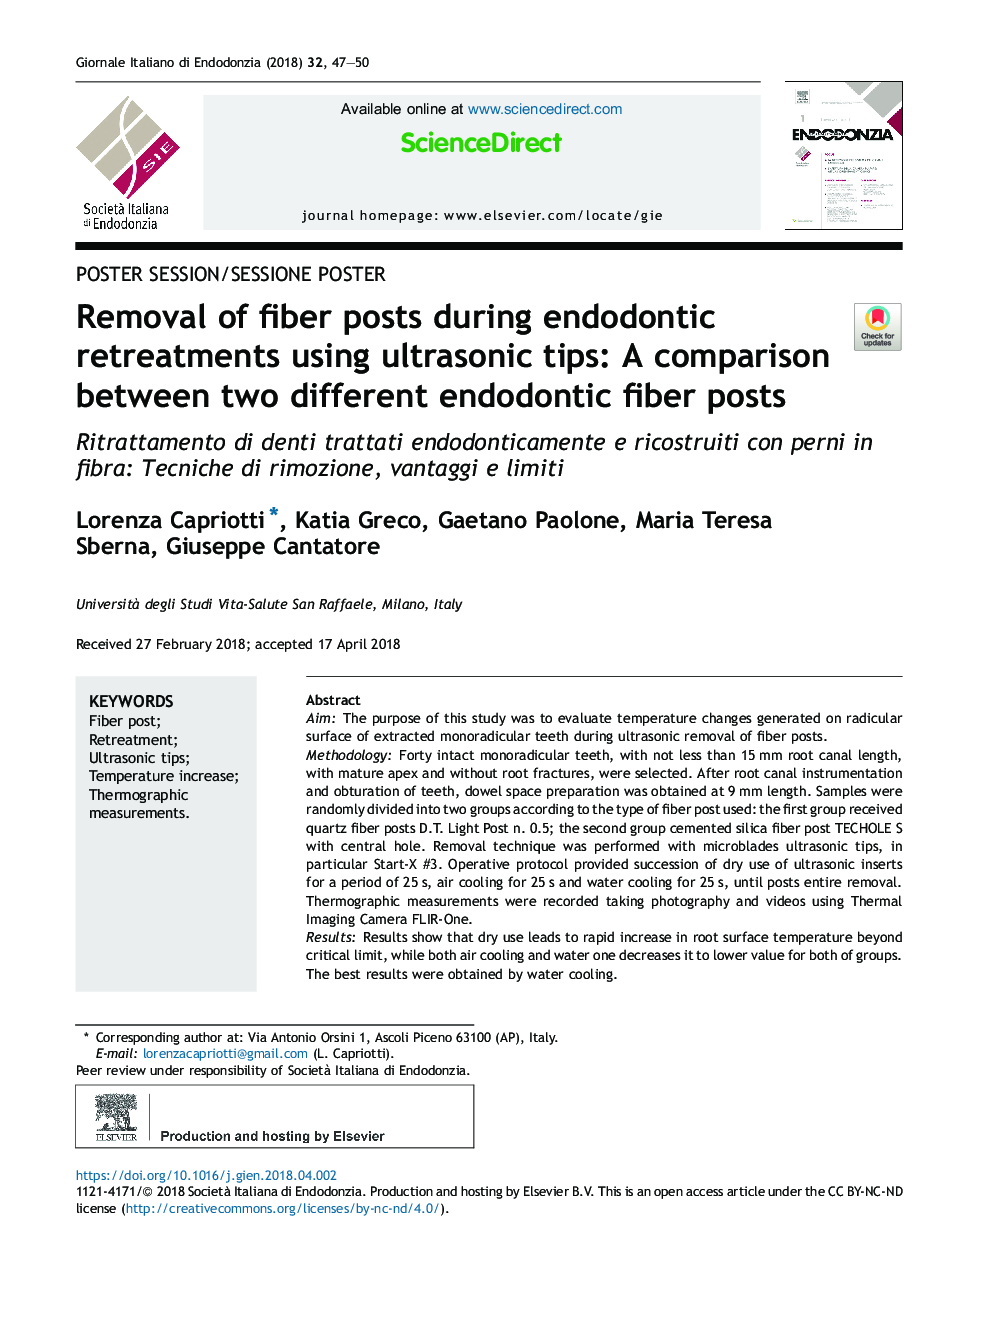 Removal of fiber posts during endodontic retreatments using ultrasonic tips: A comparison between two different endodontic fiber posts